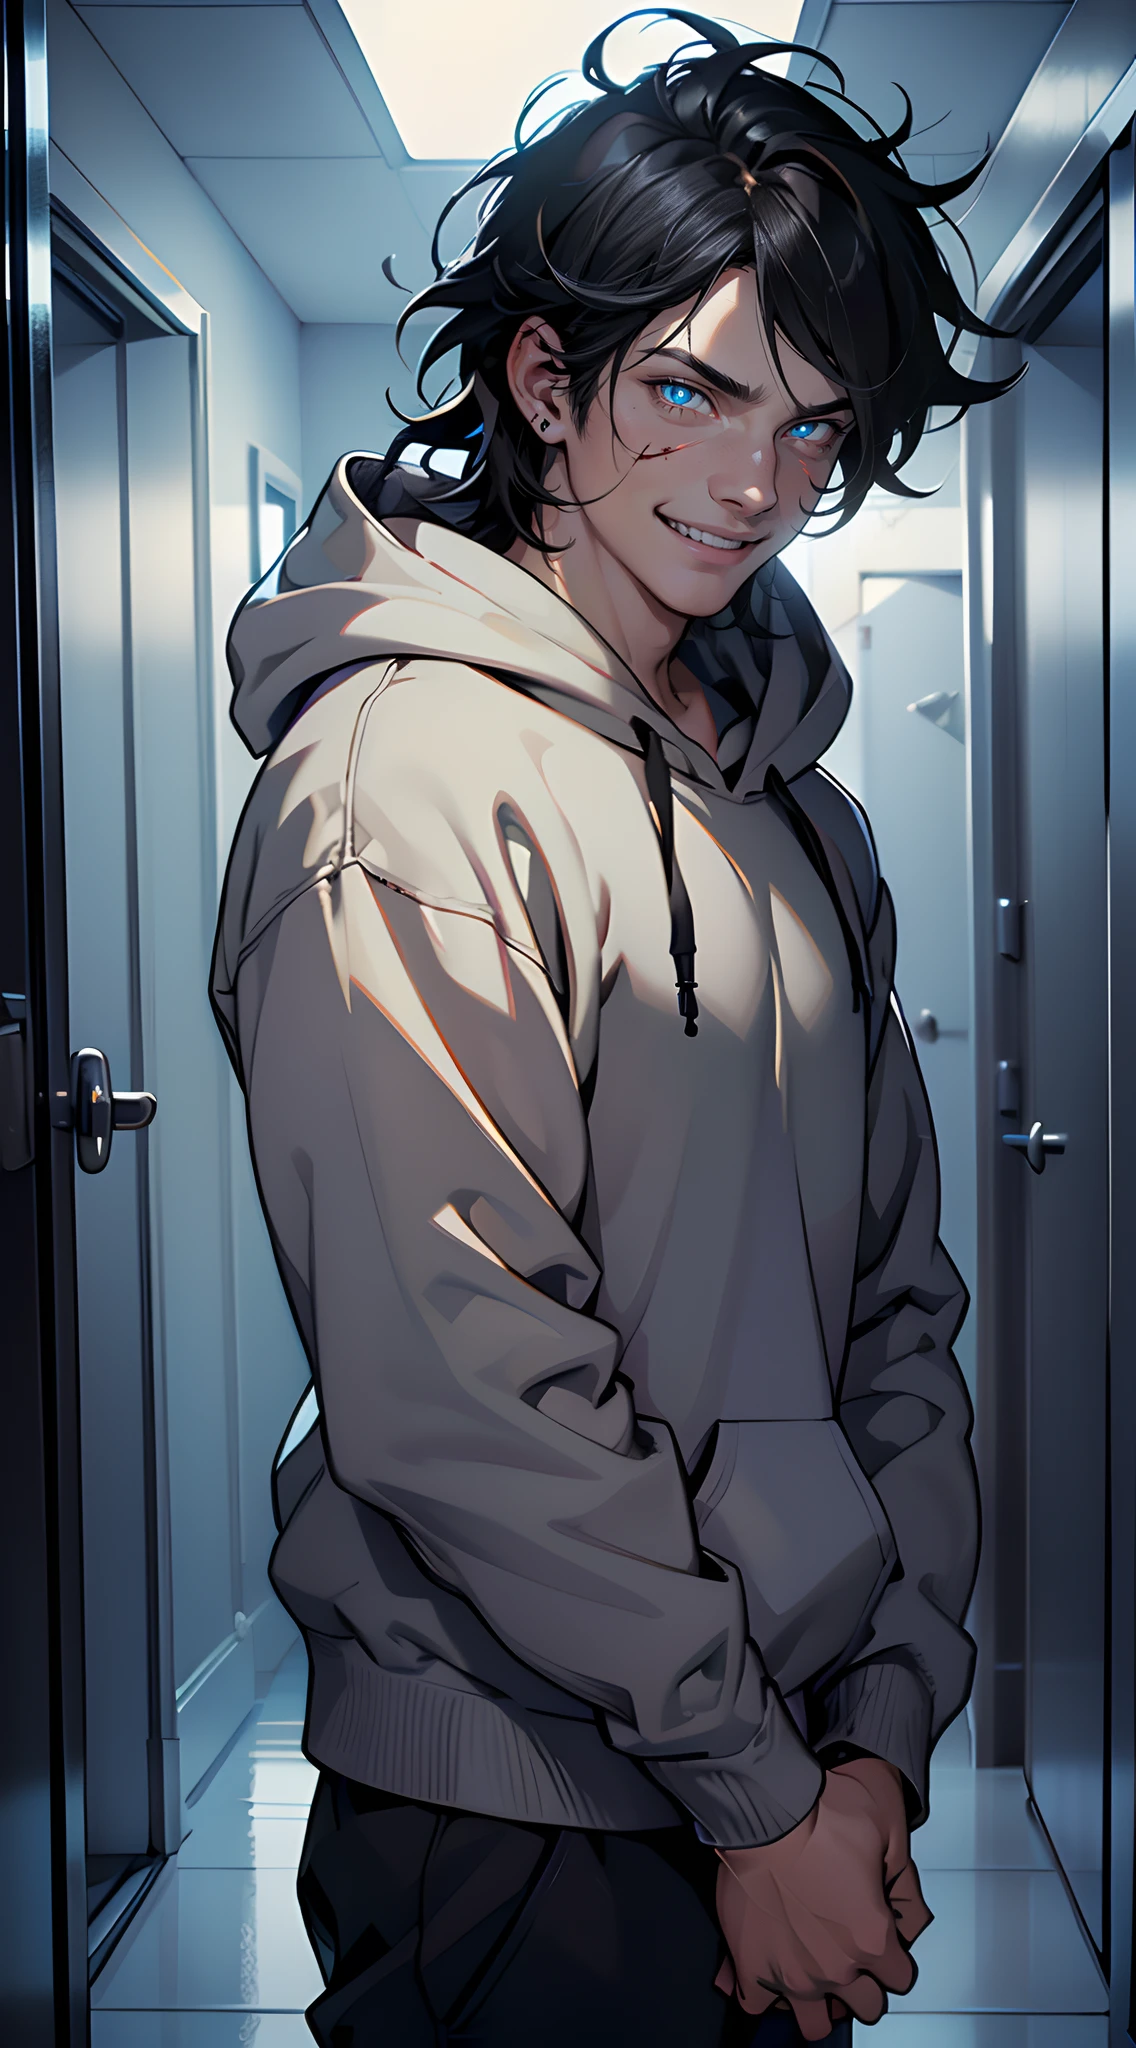 (tmasterpiece, high resolution, ultra - detailed:1.0), (1boy, Adult male), Perfect male body, Eyes look at the camera, Delicate eyes and delicate face, Extremely detailed CG, Unity 8k wallpaper, Complicated details, solo person, Detailed face, (Black hair, Messy hair, Crazy expression, Gray hoodie,blood in face,Dagger in hand), (Crazy smile:1.2) , (Mad eyes:1.3) , (wide-eyed:1.2,small pupil),Dark corridors,Night, color difference, Depth of field, dramatic shadow, Ray tracing, Best quality, offcial art, Portrait,